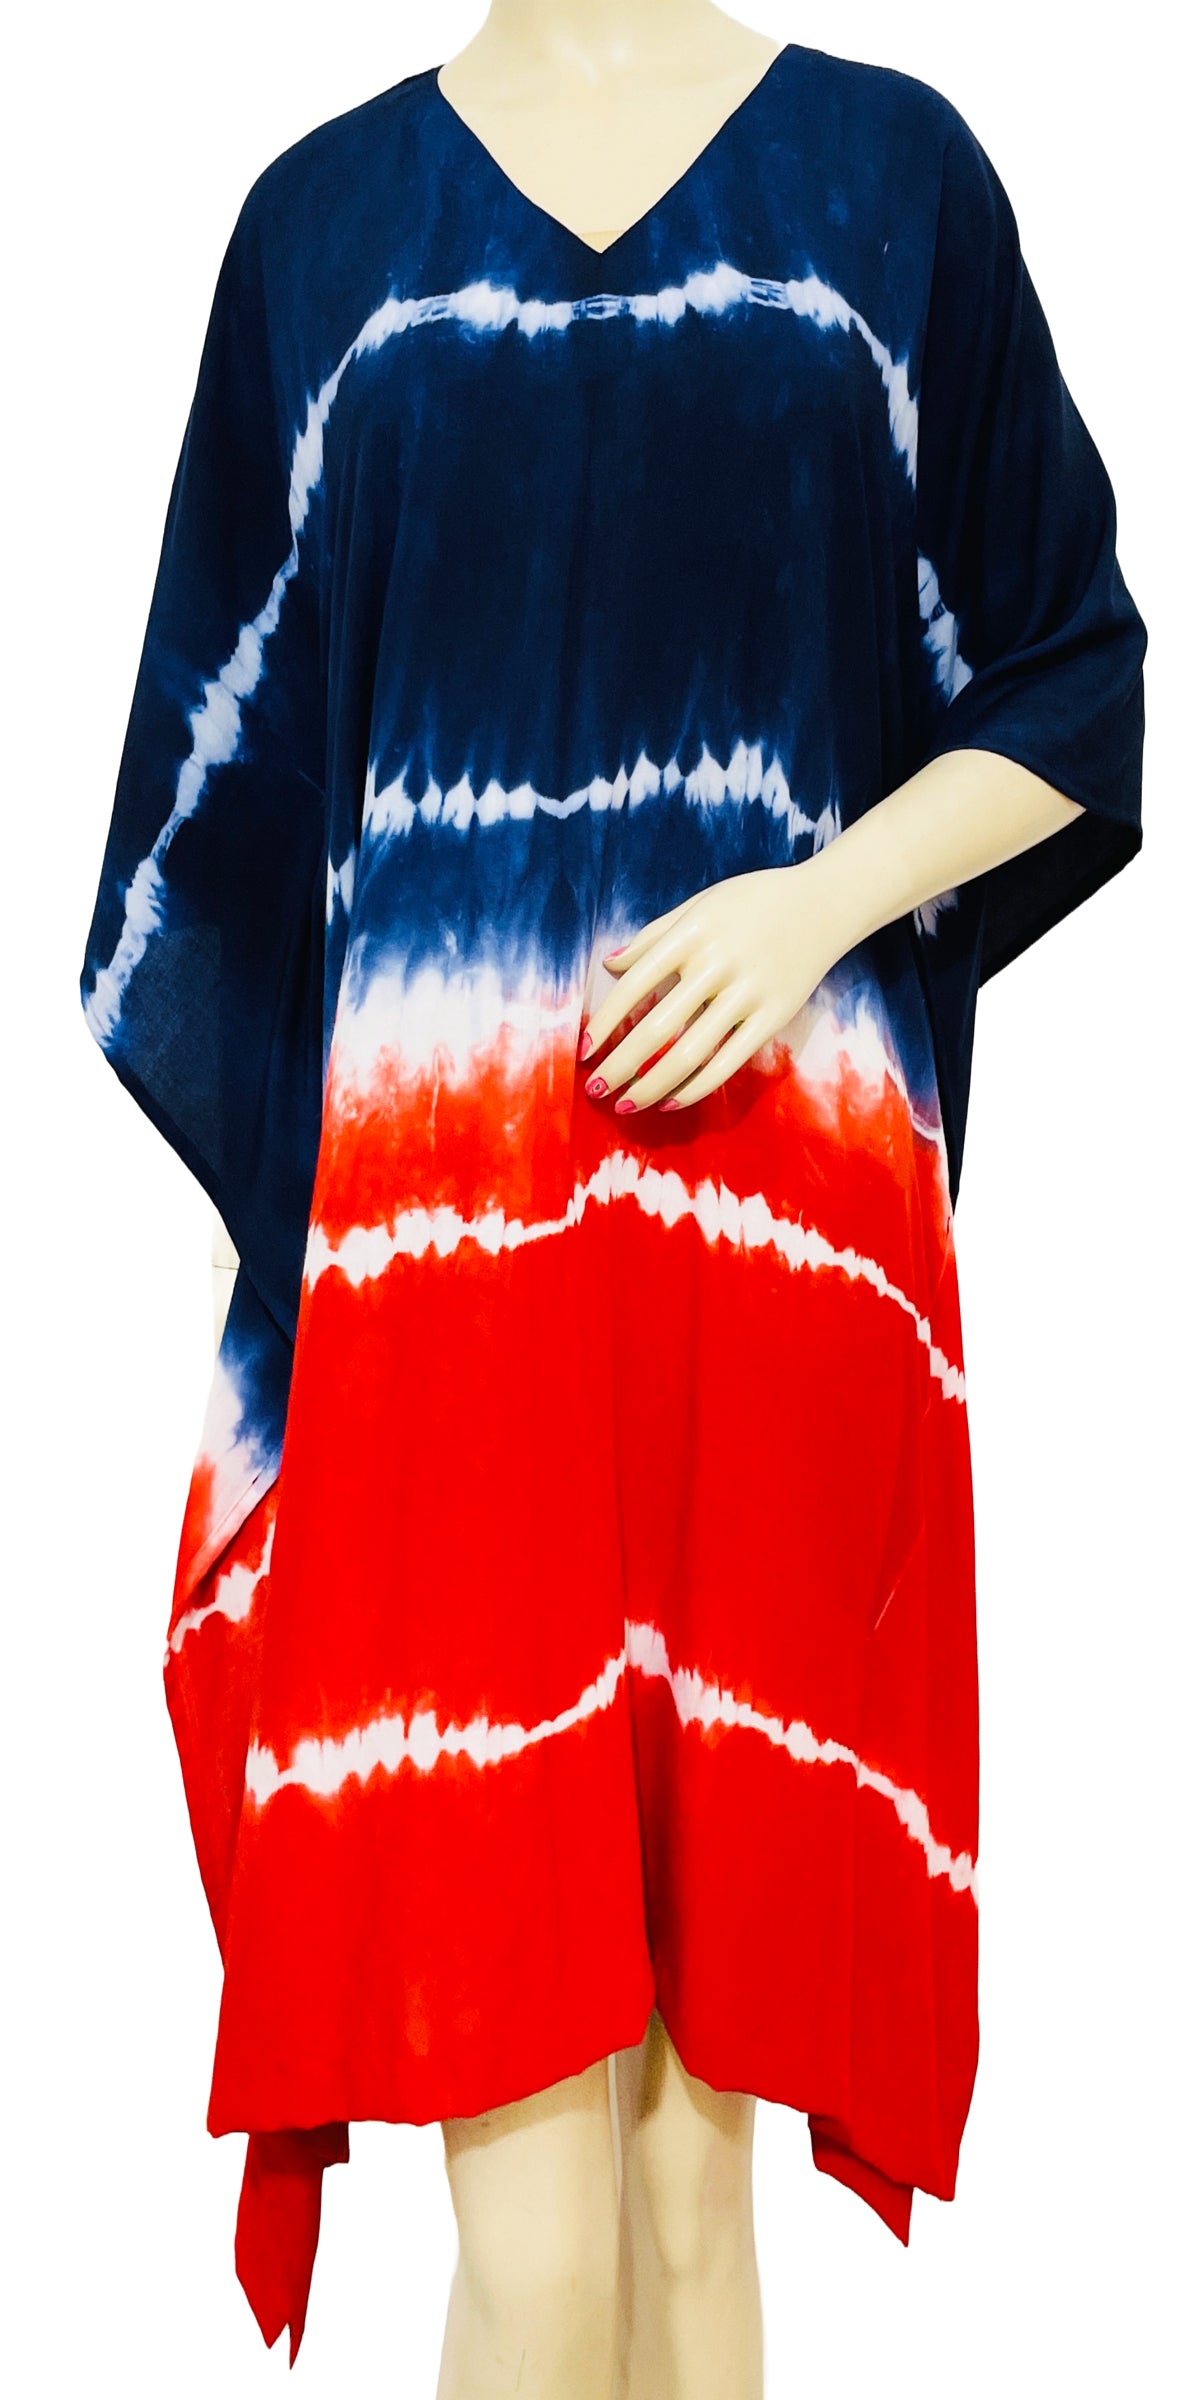 American Flag Dress, 4th July Parade dress, Summer Special Dress, Tie dye Kaftan, Red Blue White Dress, Independence day dress, Maxi, Dress, Outfit for Patriotic day.